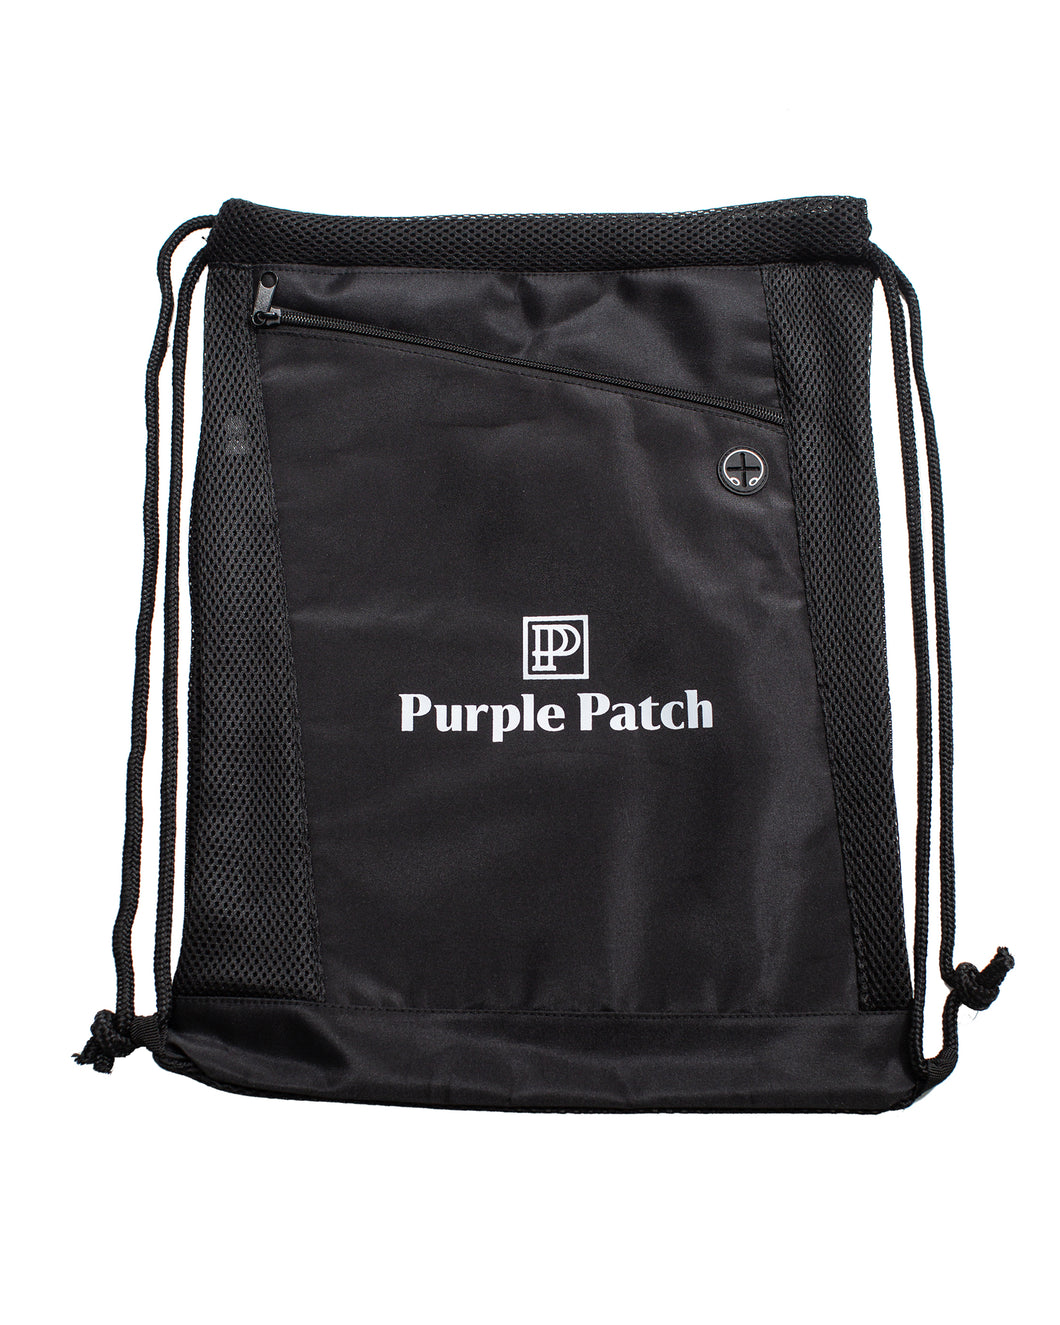 Deluxe Purple Patch Drawstring Bag